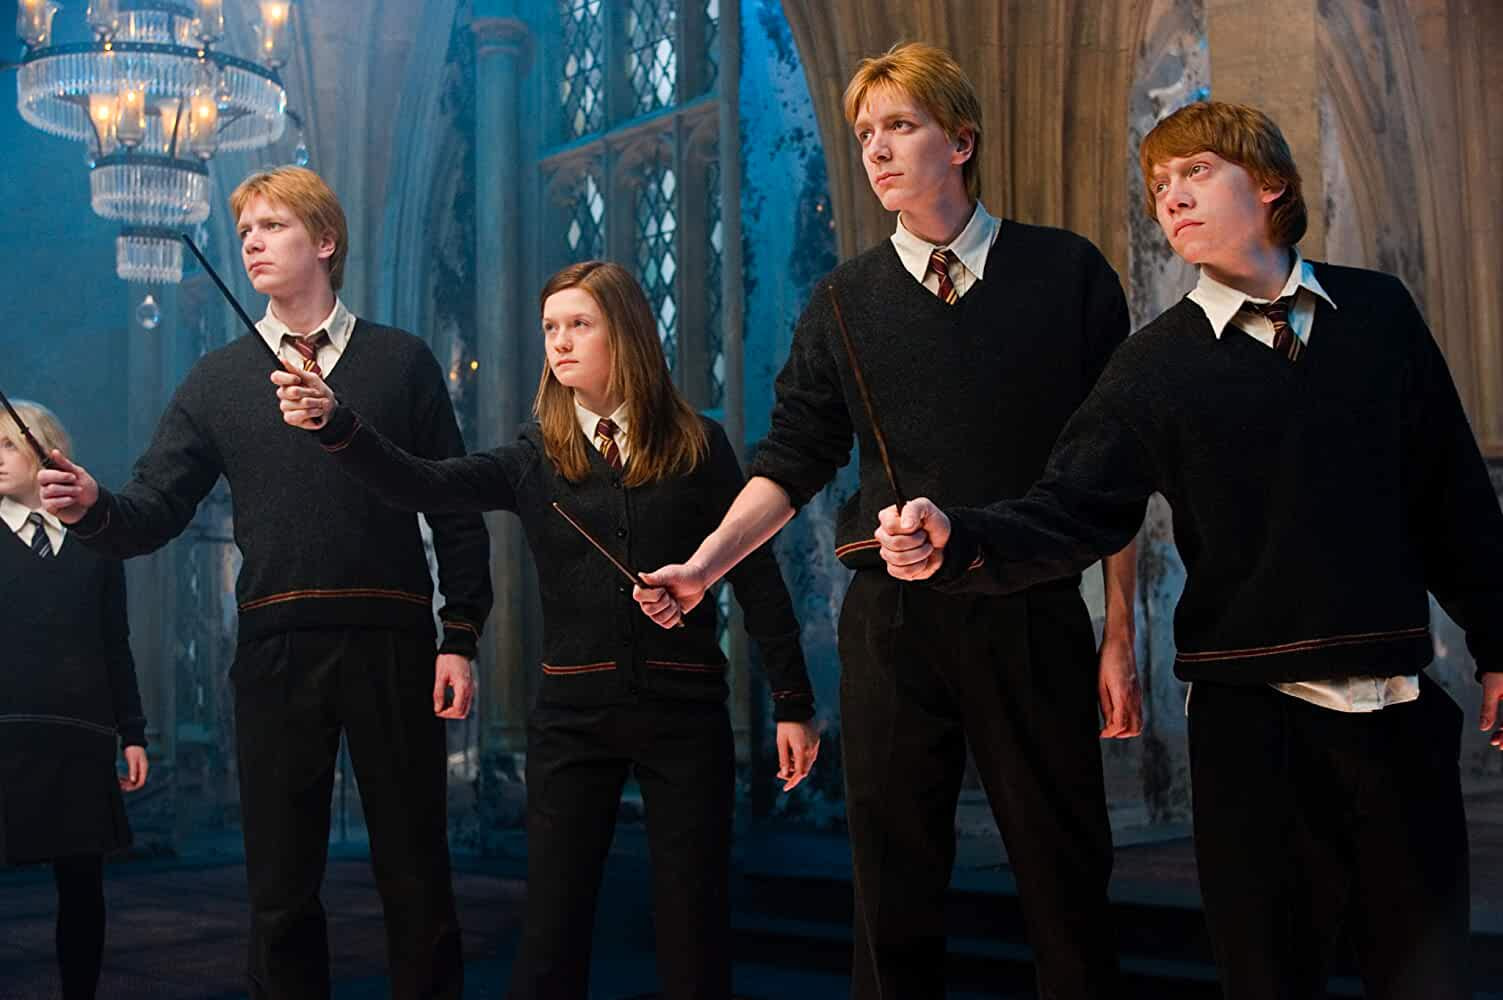 Harry Potter Series: Evanna Lynch, James Phelps, Bonnie Wright, Oliver Phelps, Rupert Grint (Left to right)